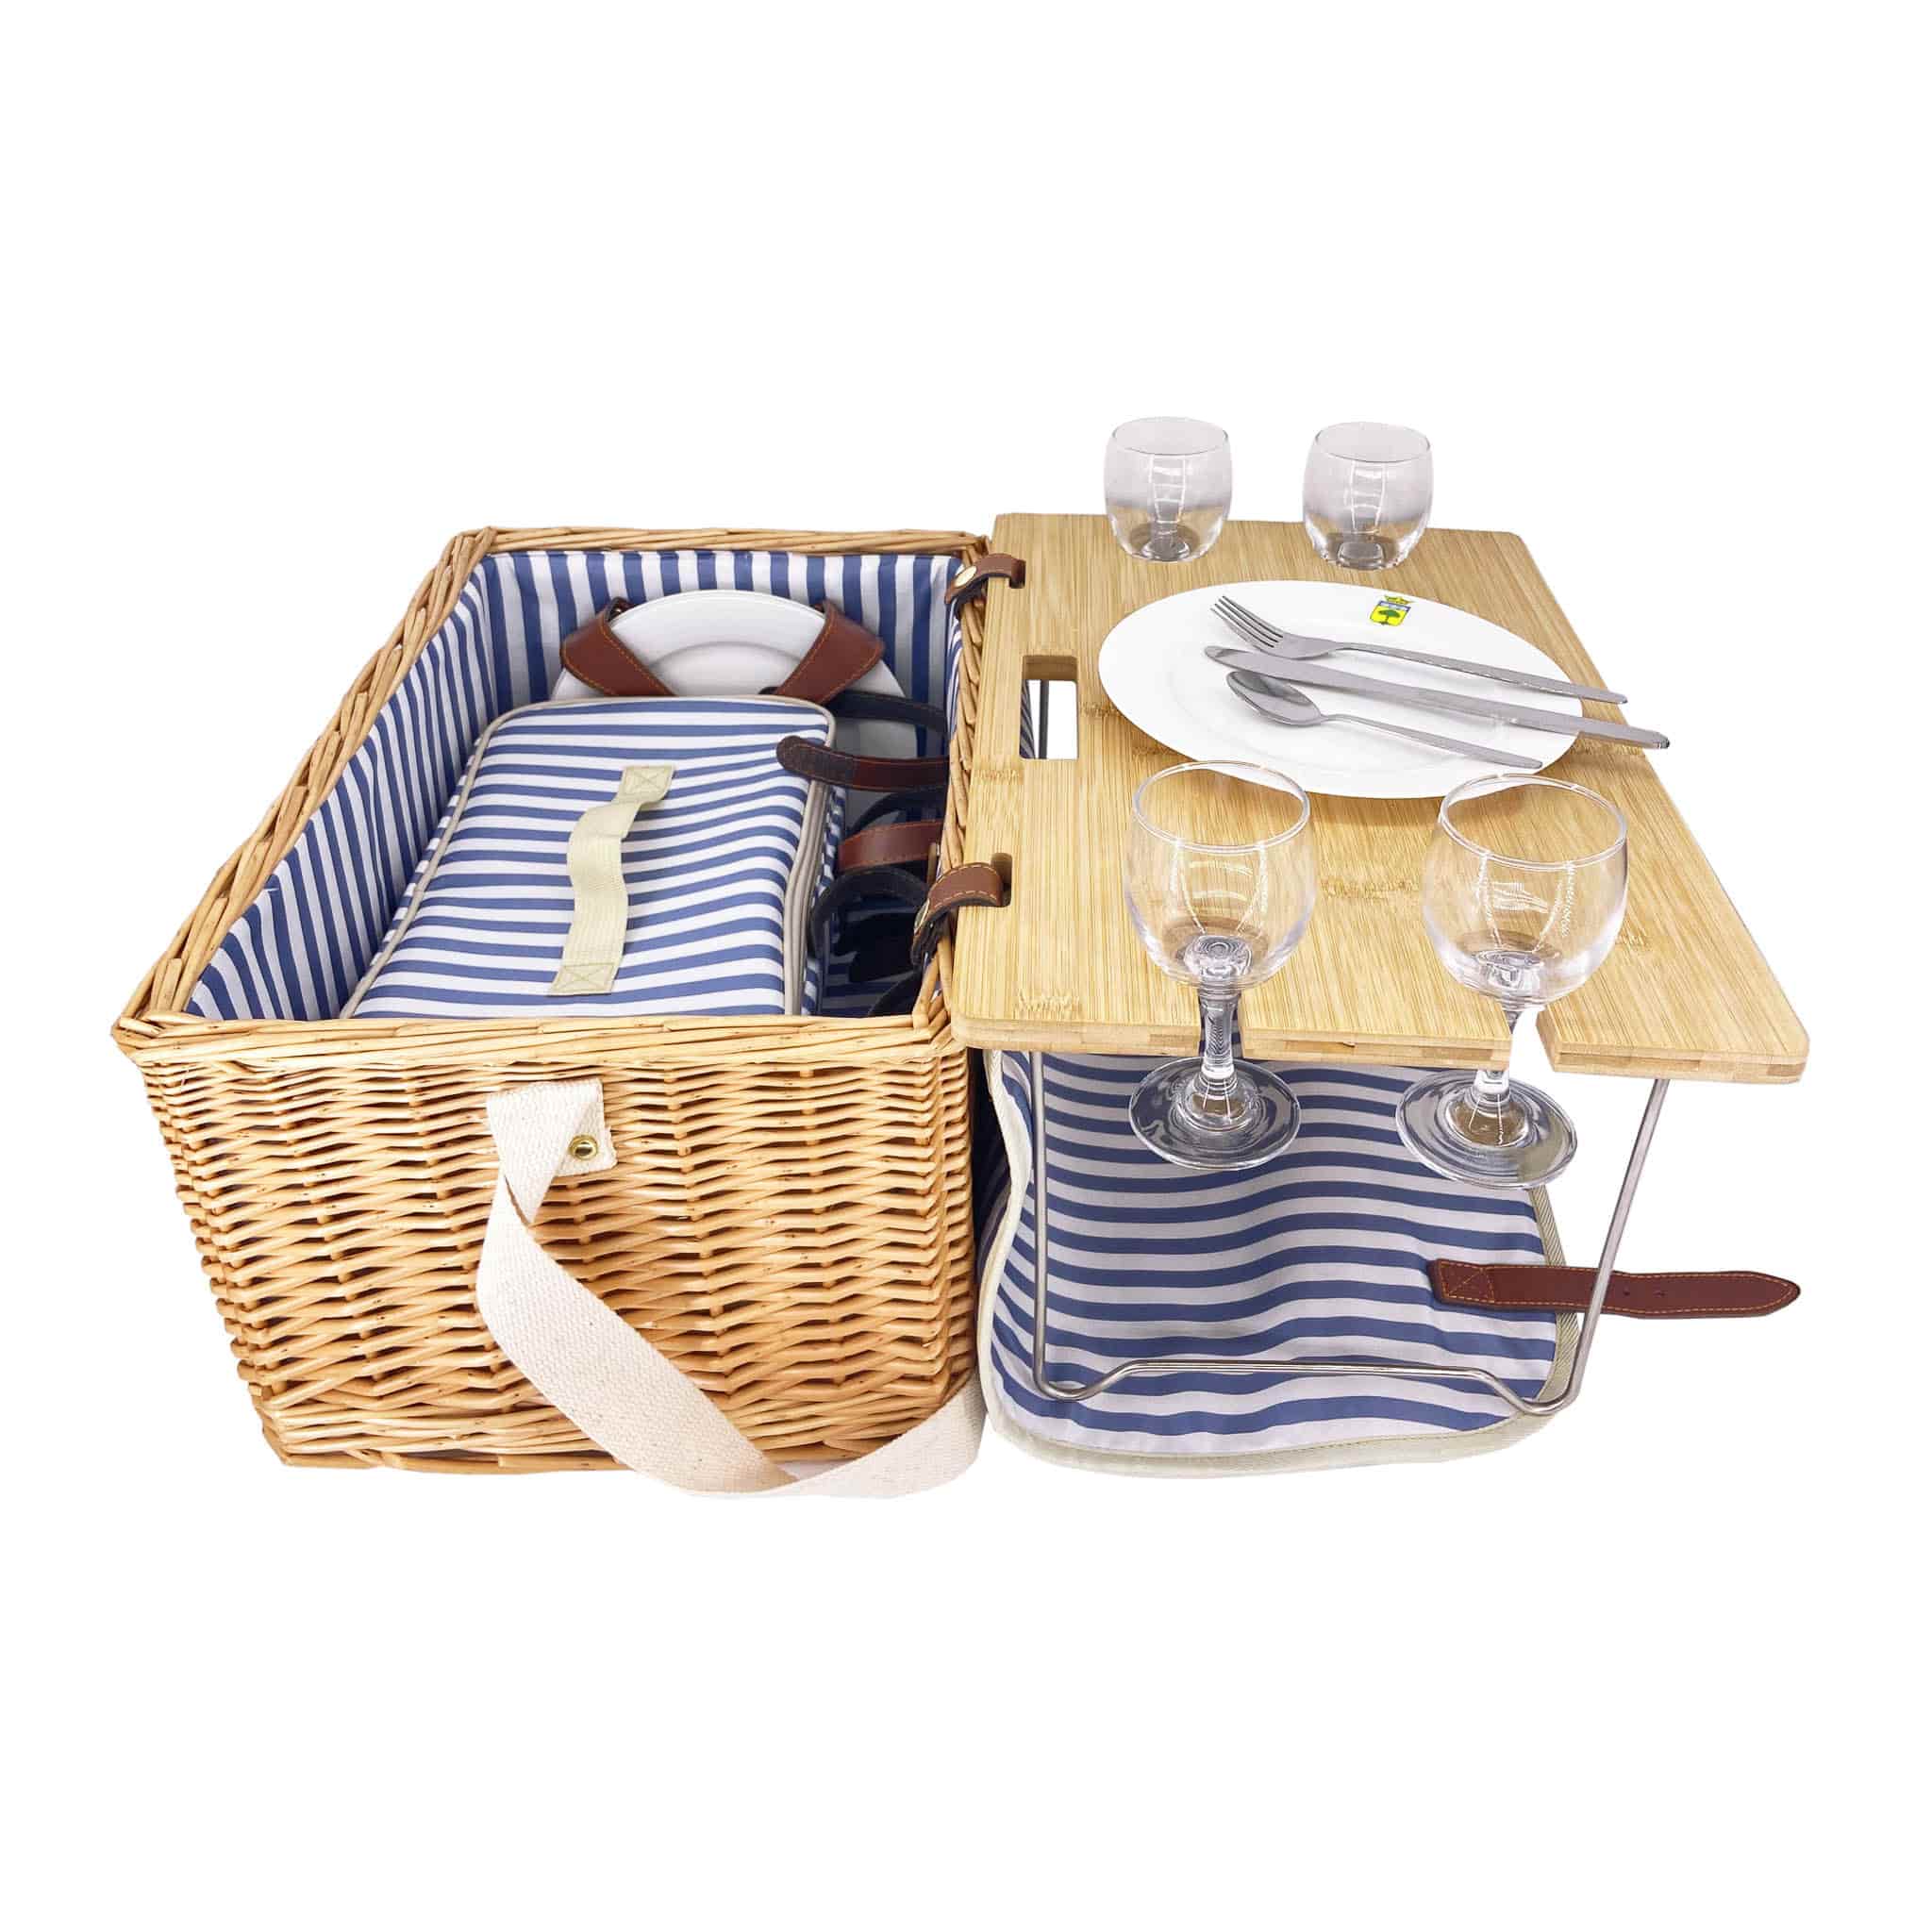 Saint-Malo Blue Striped Picnic Basket with Table, 4 Person